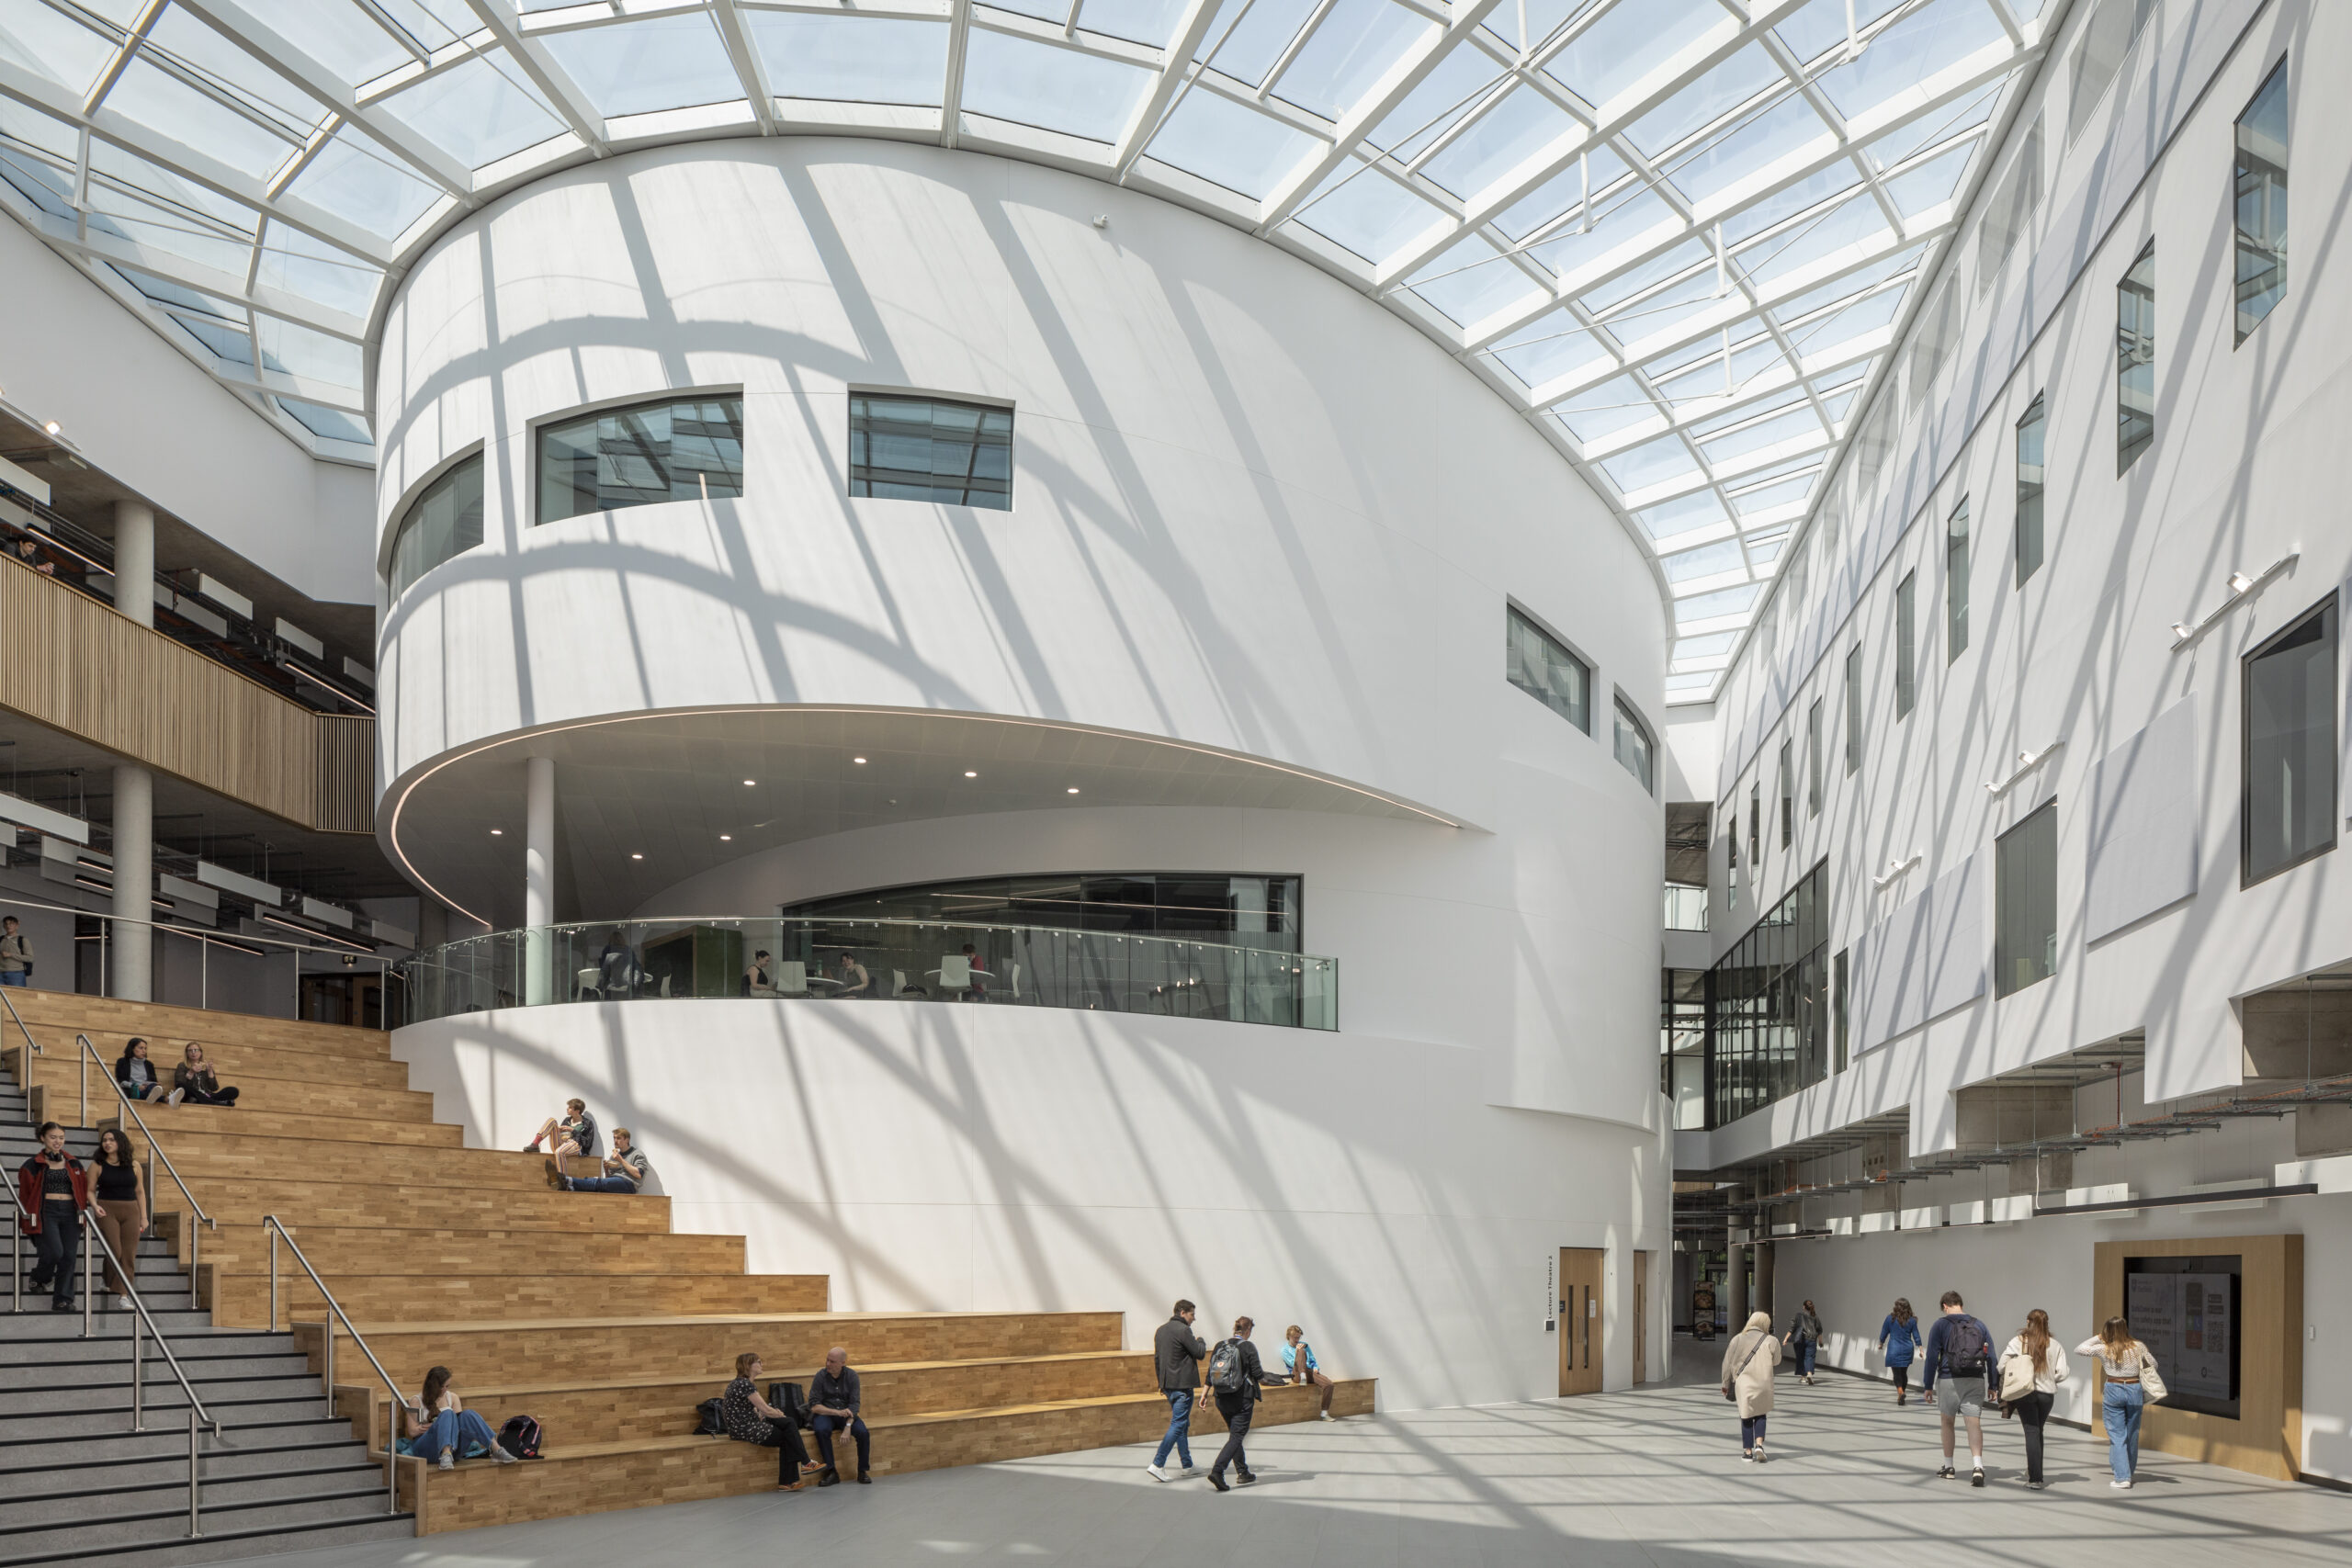 The Wave for The University of Sheffield is home to the Faculty of Social Sciences. Designed by HLM Architects, the £55 Million BREEAM Outstanding building opened in spring 2023.